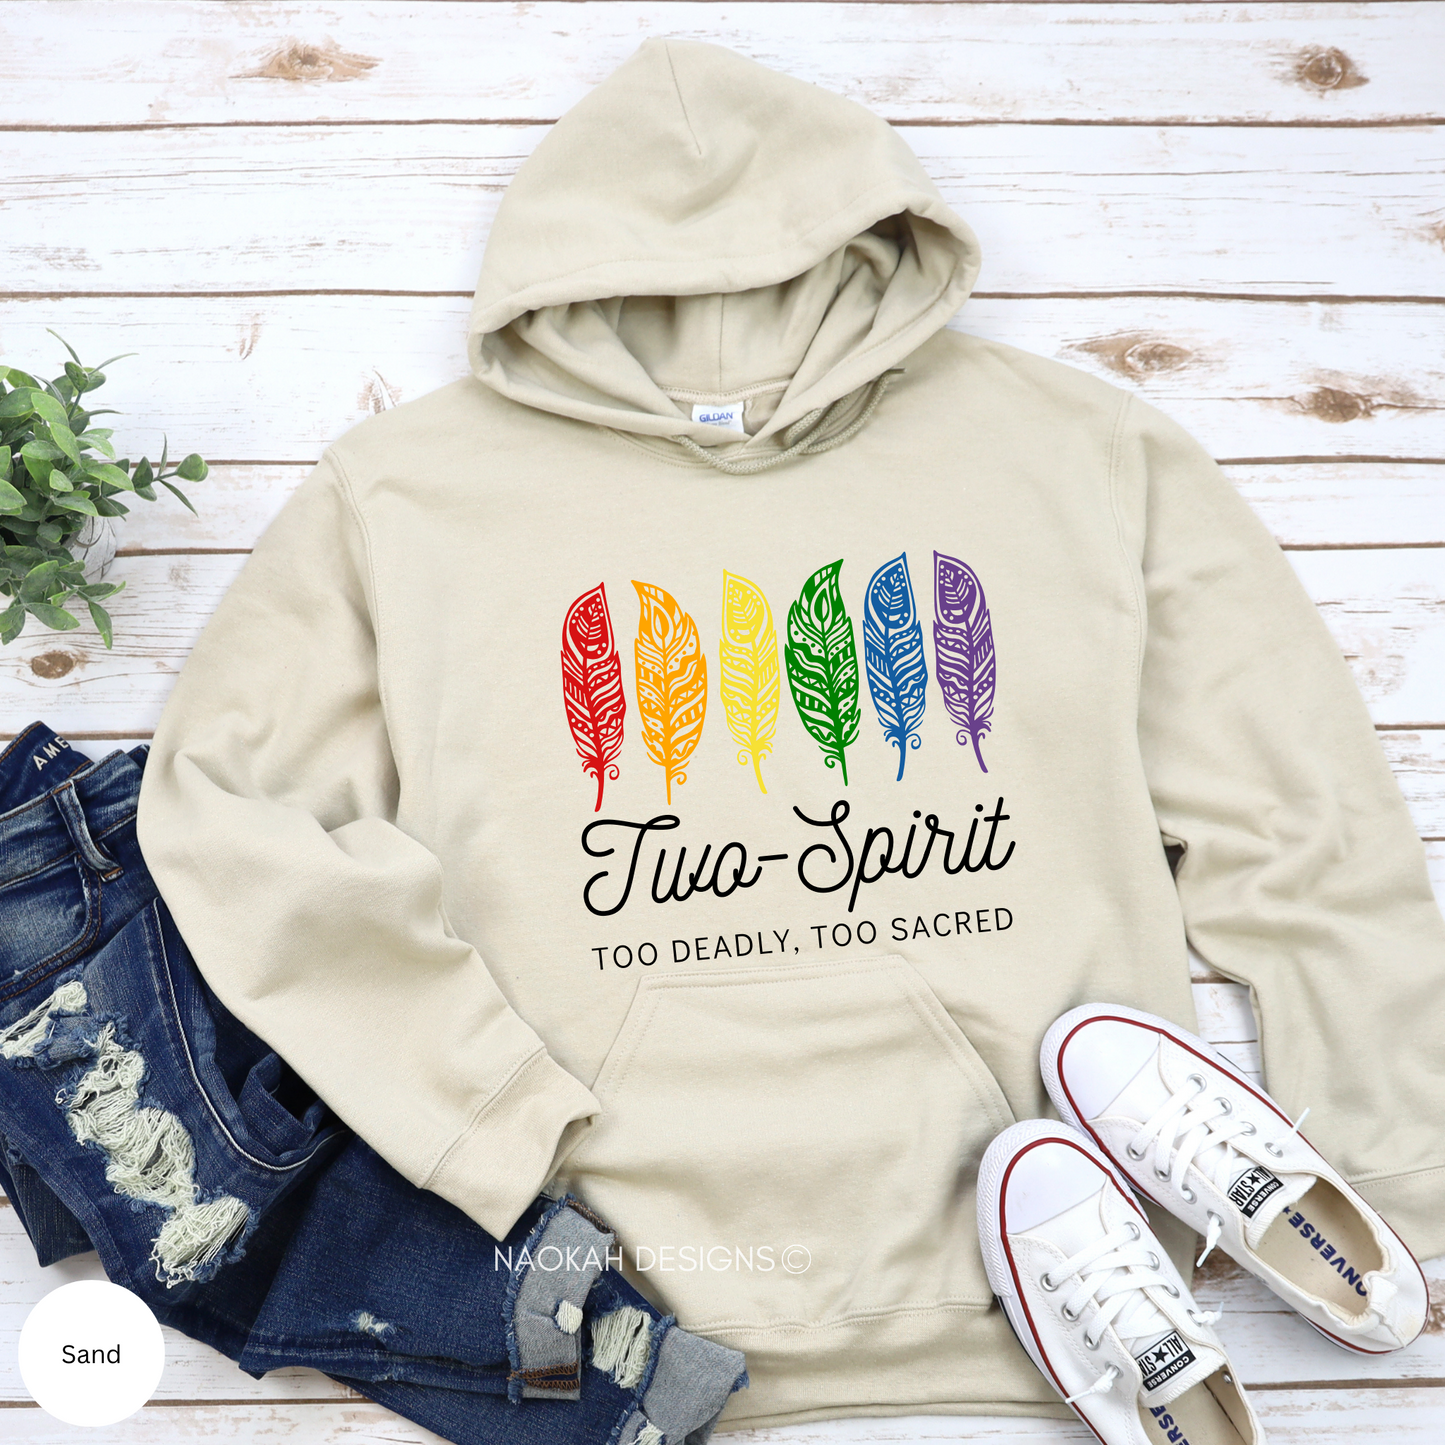 two-spirit shirt, too deadly too sacred sweater, indigenous owned, indigenous pride sweater, two spirit warrior, human rights sweater